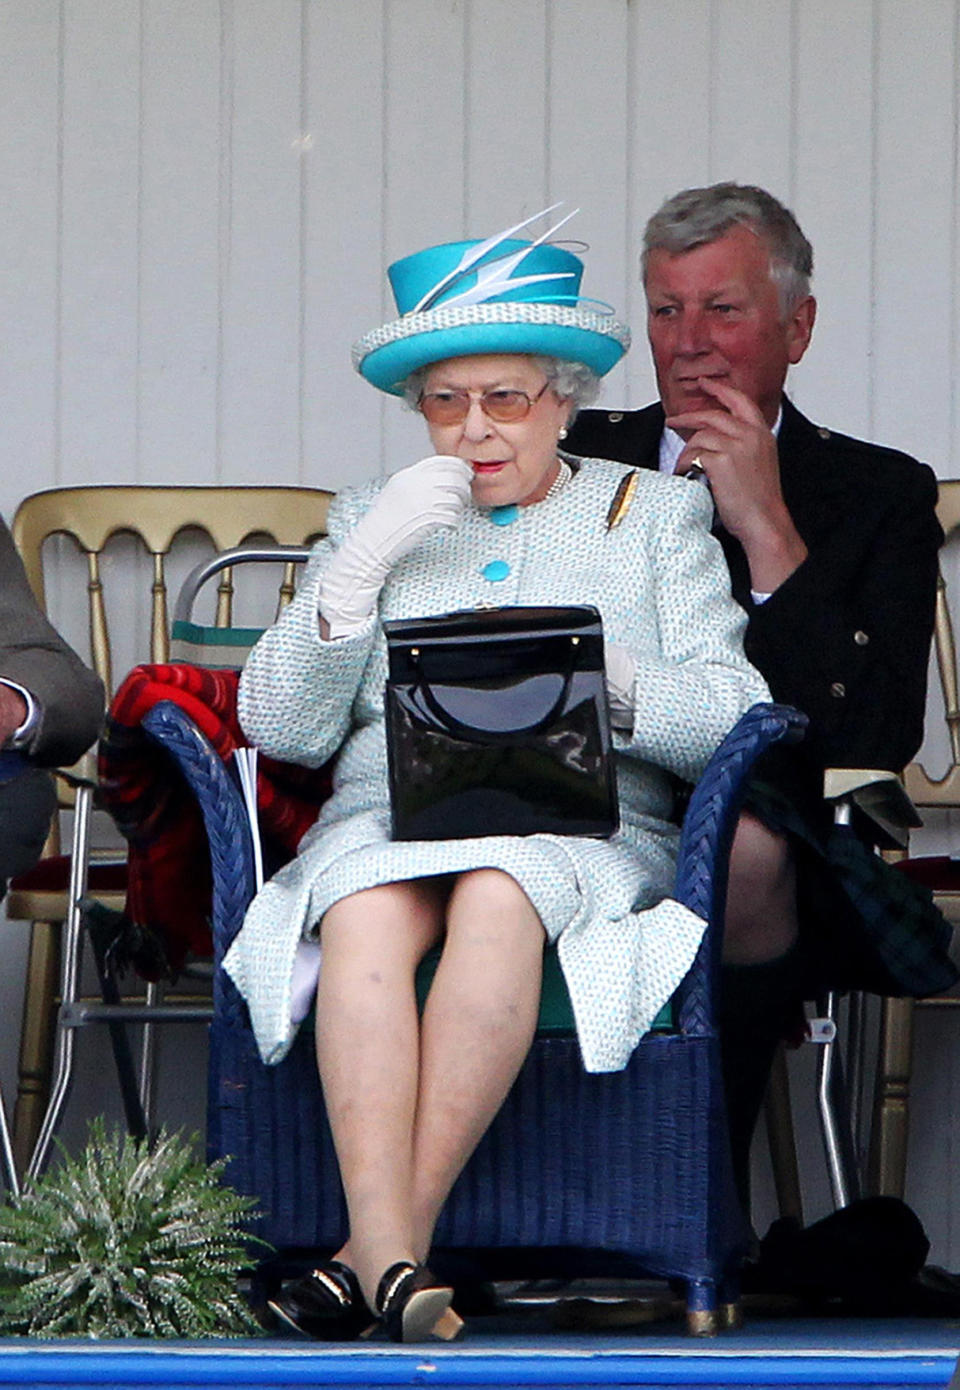 The Queen applies lipstick at the Braemar Gathering in Braemar. [Photo: PA]